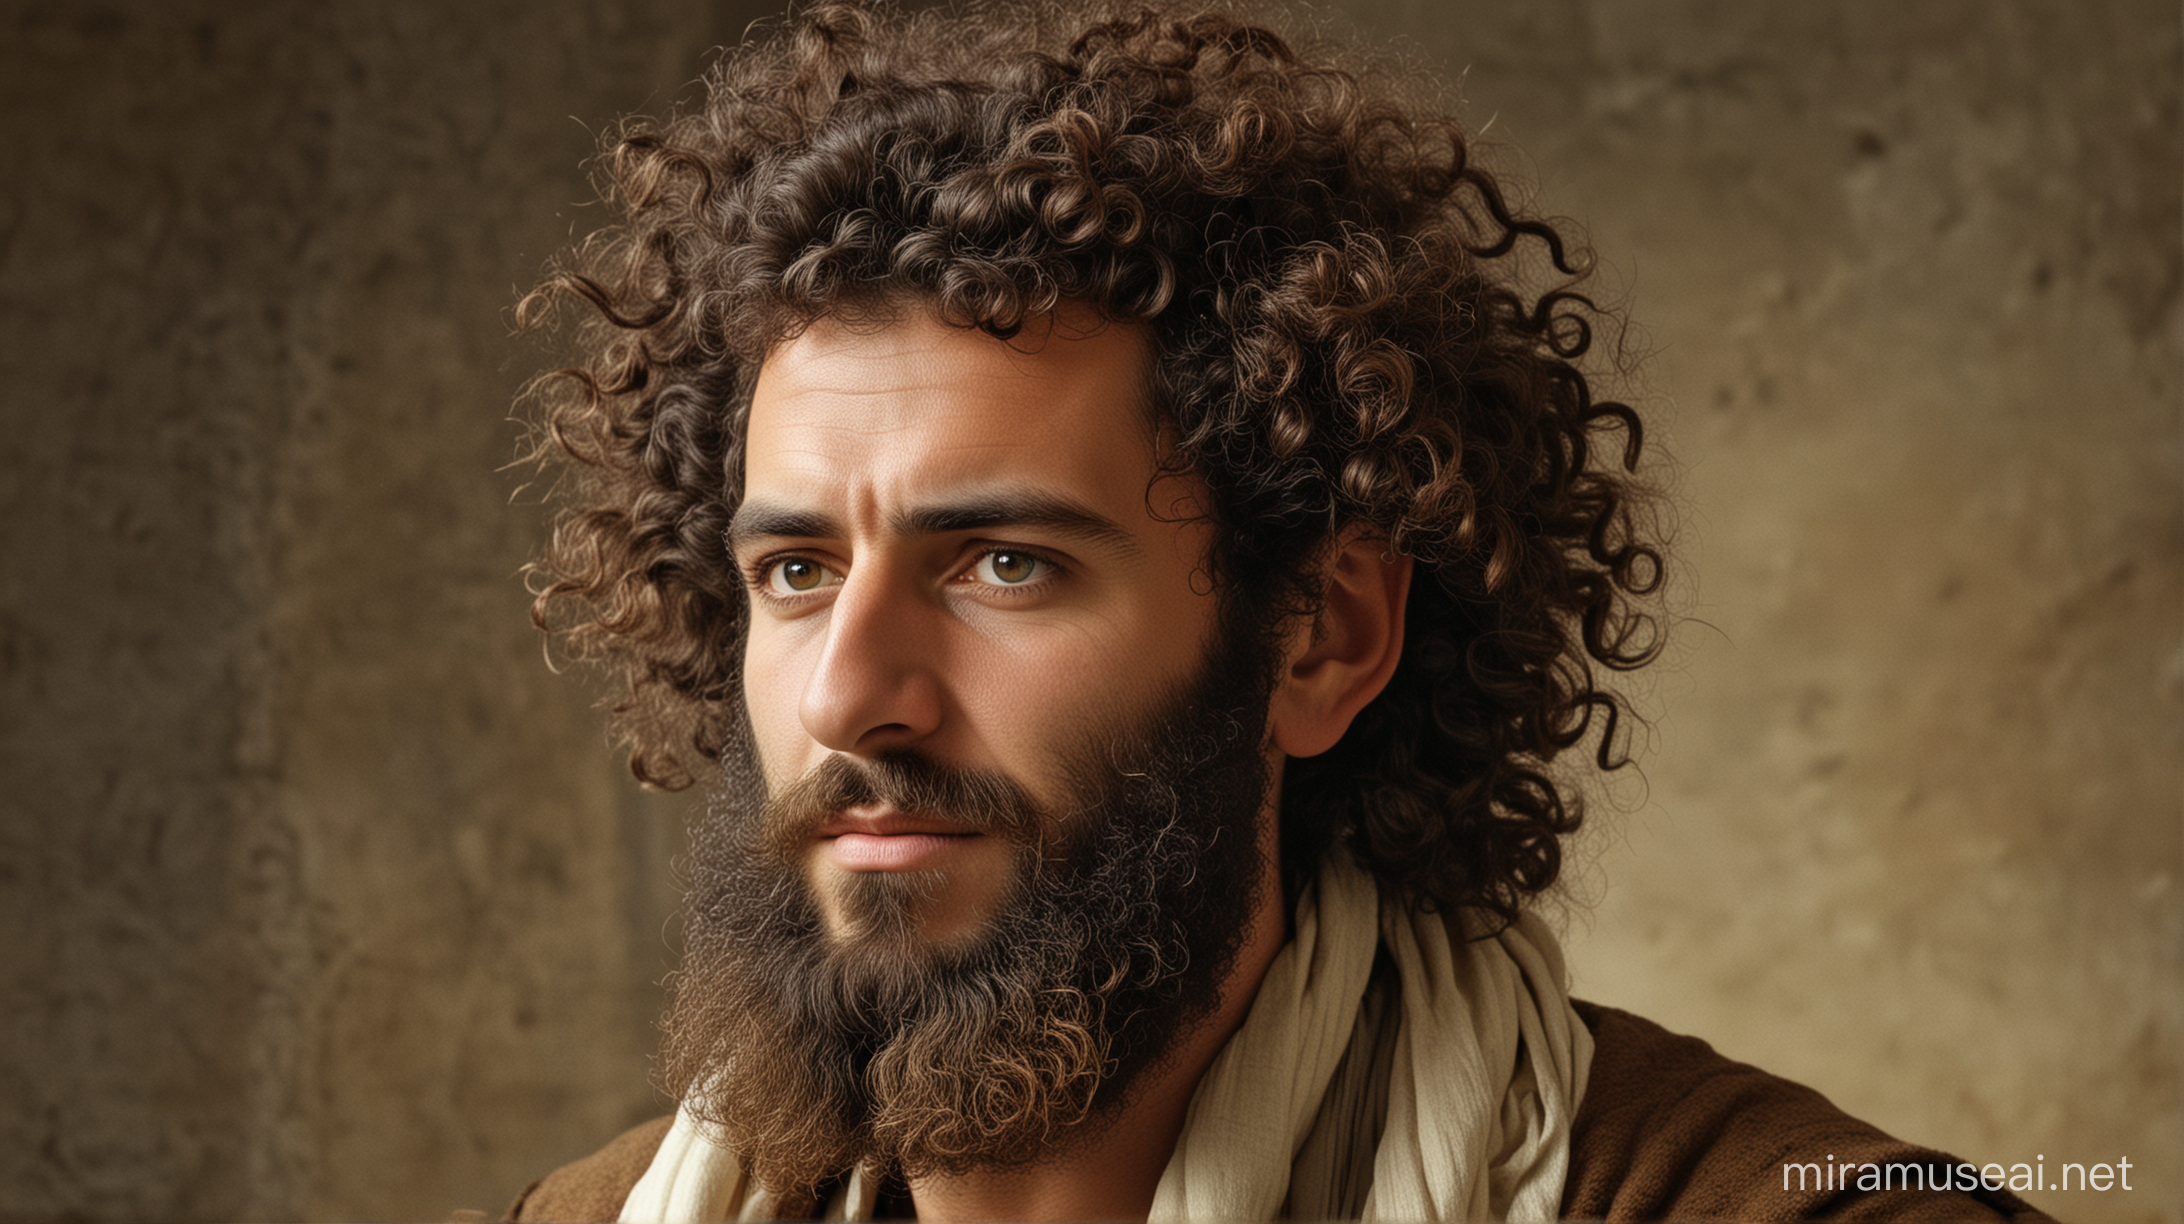 Jewish Man with Thick Hair in Moses Era Attire